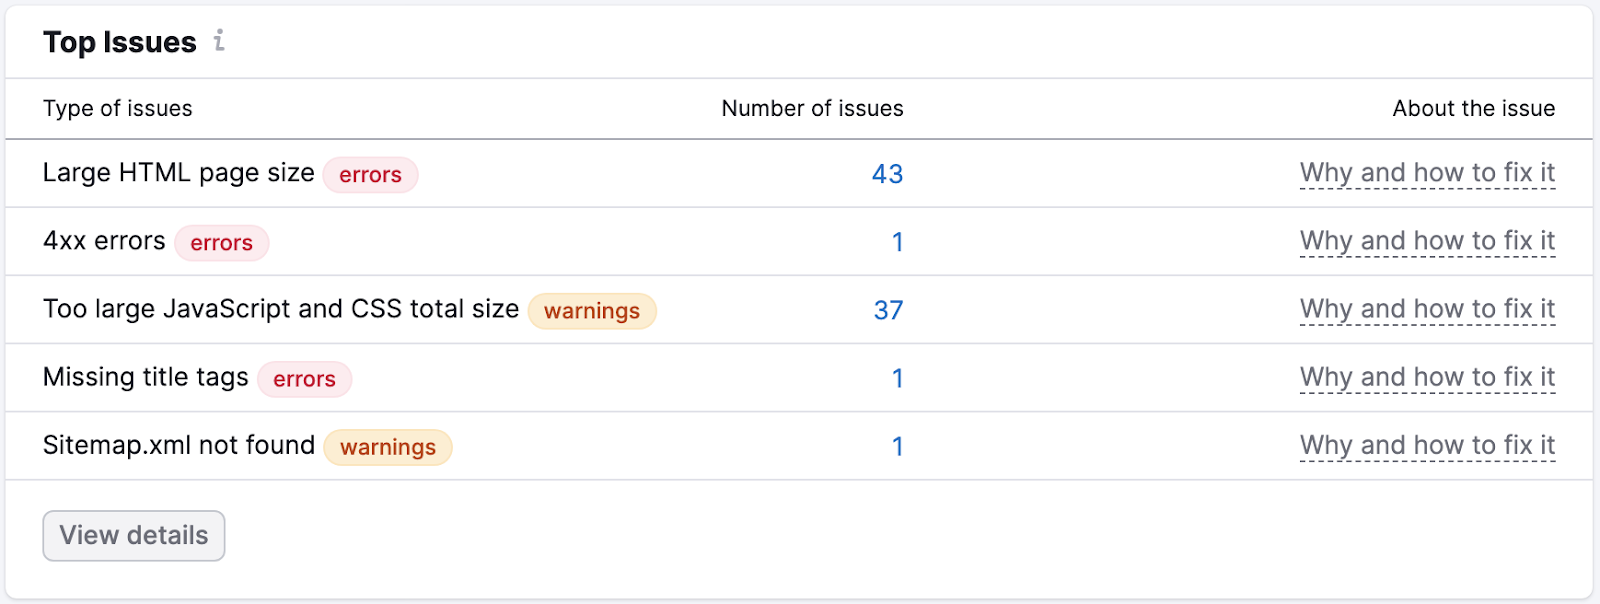 "Top Issues" section of the Site Audit report